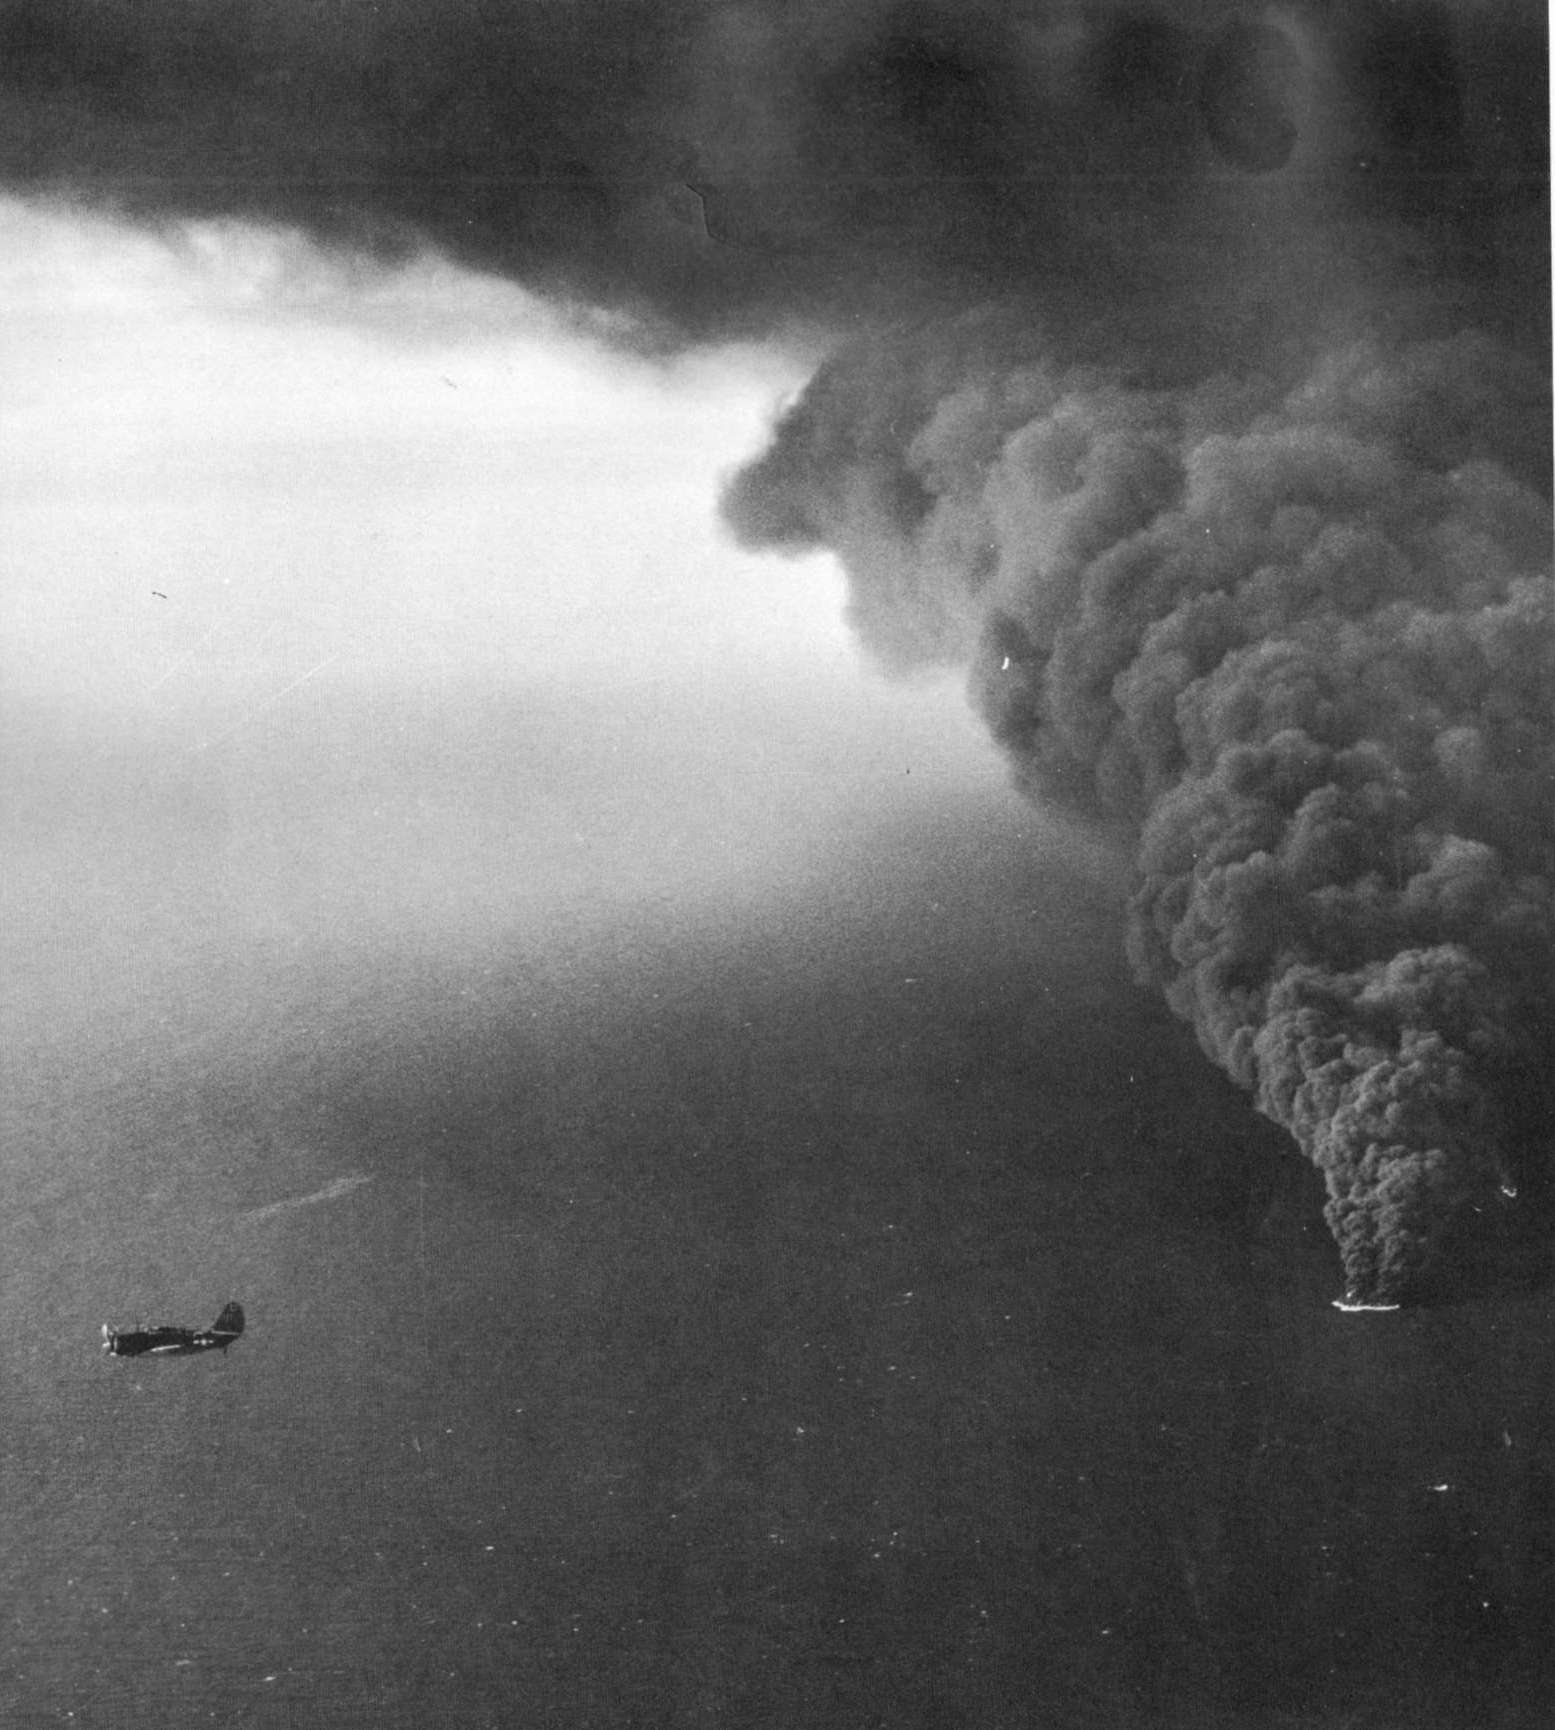 Strike photo of a Curtiss SB2C Helldiver from USS Hancock over burning Japanese merchant ships off French Indochina (Vietnam), 12 Jan 1945.